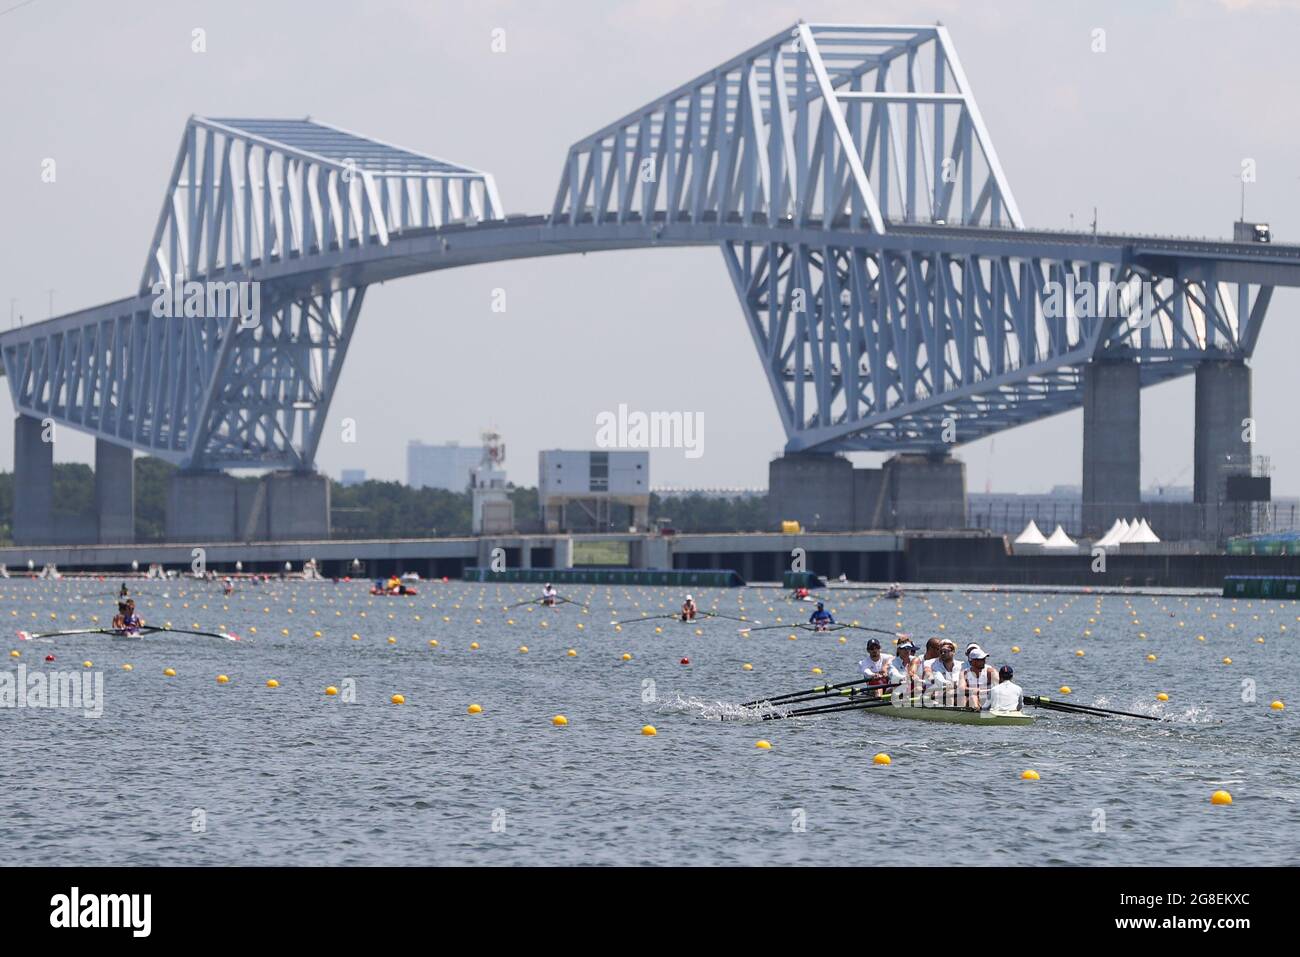 Tokyo, Japan. 20th July, 2021. Members of the British rowing team (R, bottom) attend a training session ahead of the Tokyo 2020 Olympic Games at the Sea Forest Waterway in Tokyo, Japan, July 20, 2021. Credit: Zheng Huansong/Xinhua/Alamy Live News Stock Photo